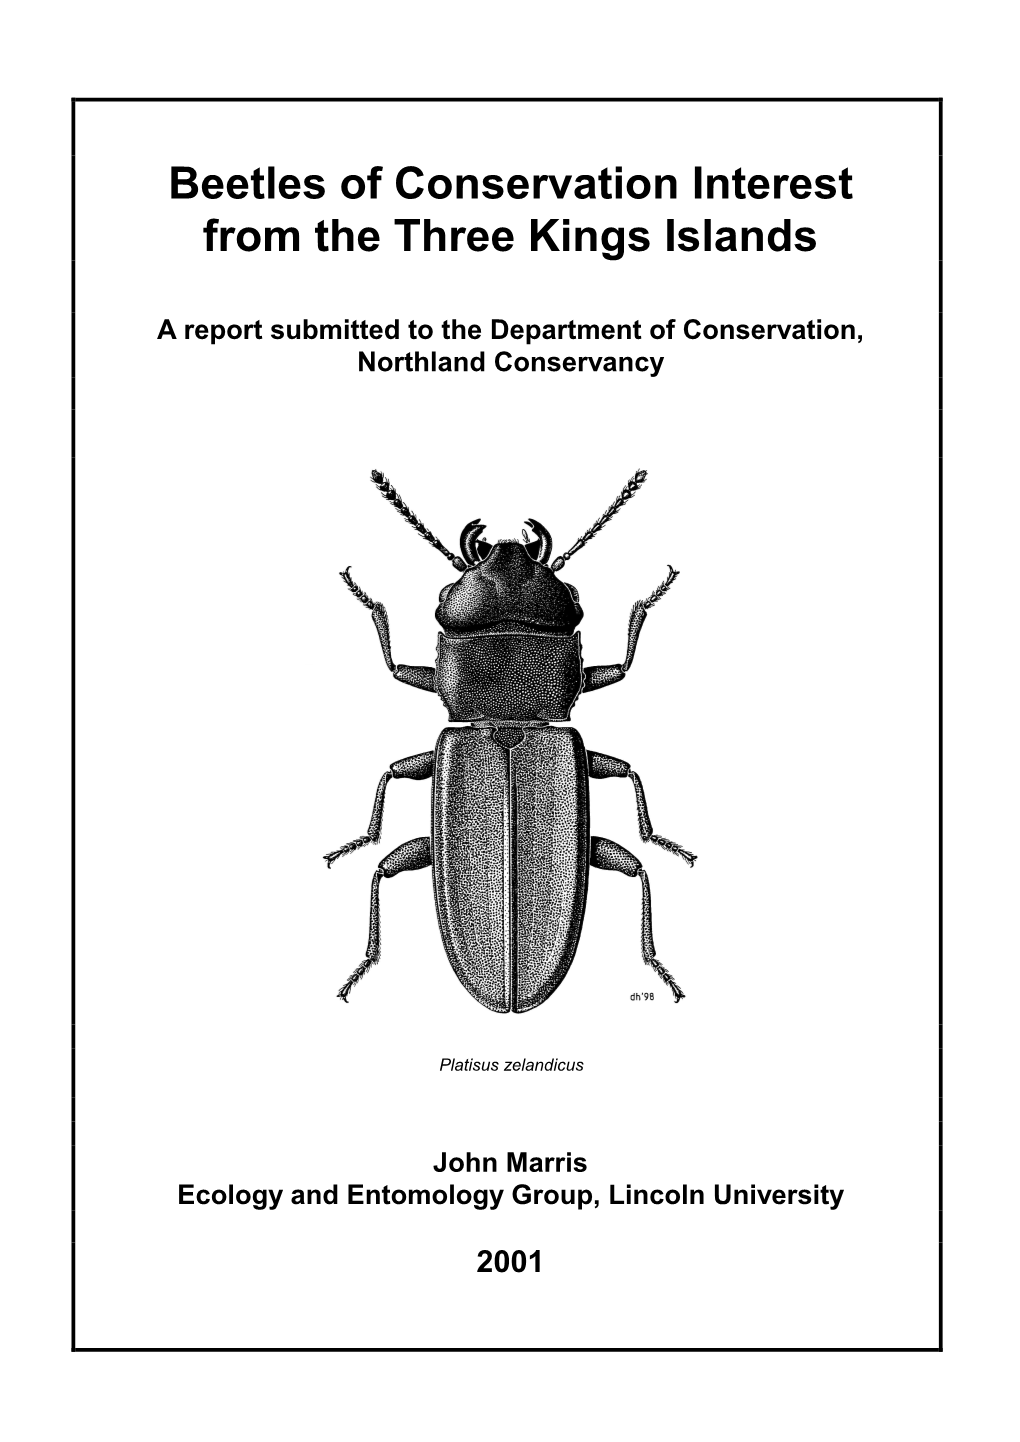 Beetles of Conservation Interest from the Three Kings Islands